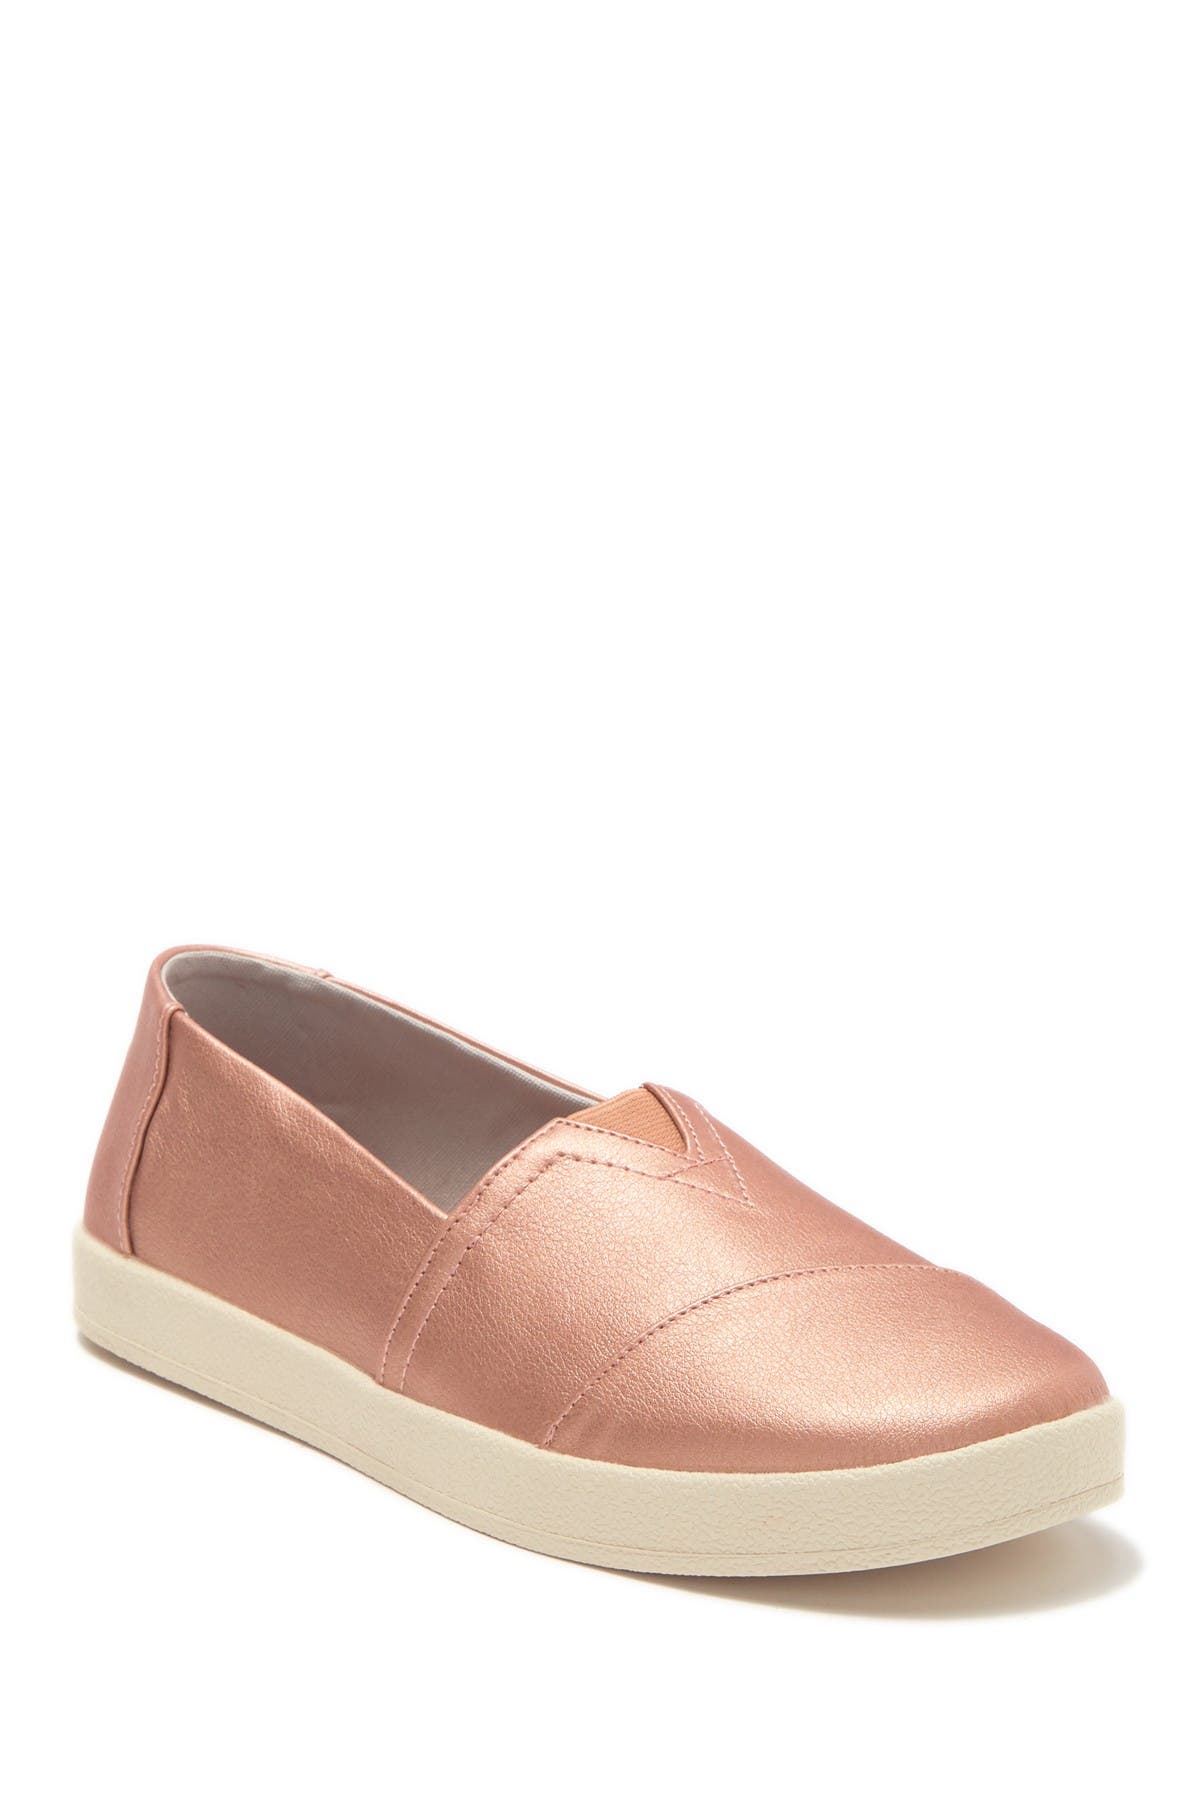 toms rose gold avalon flat shoes